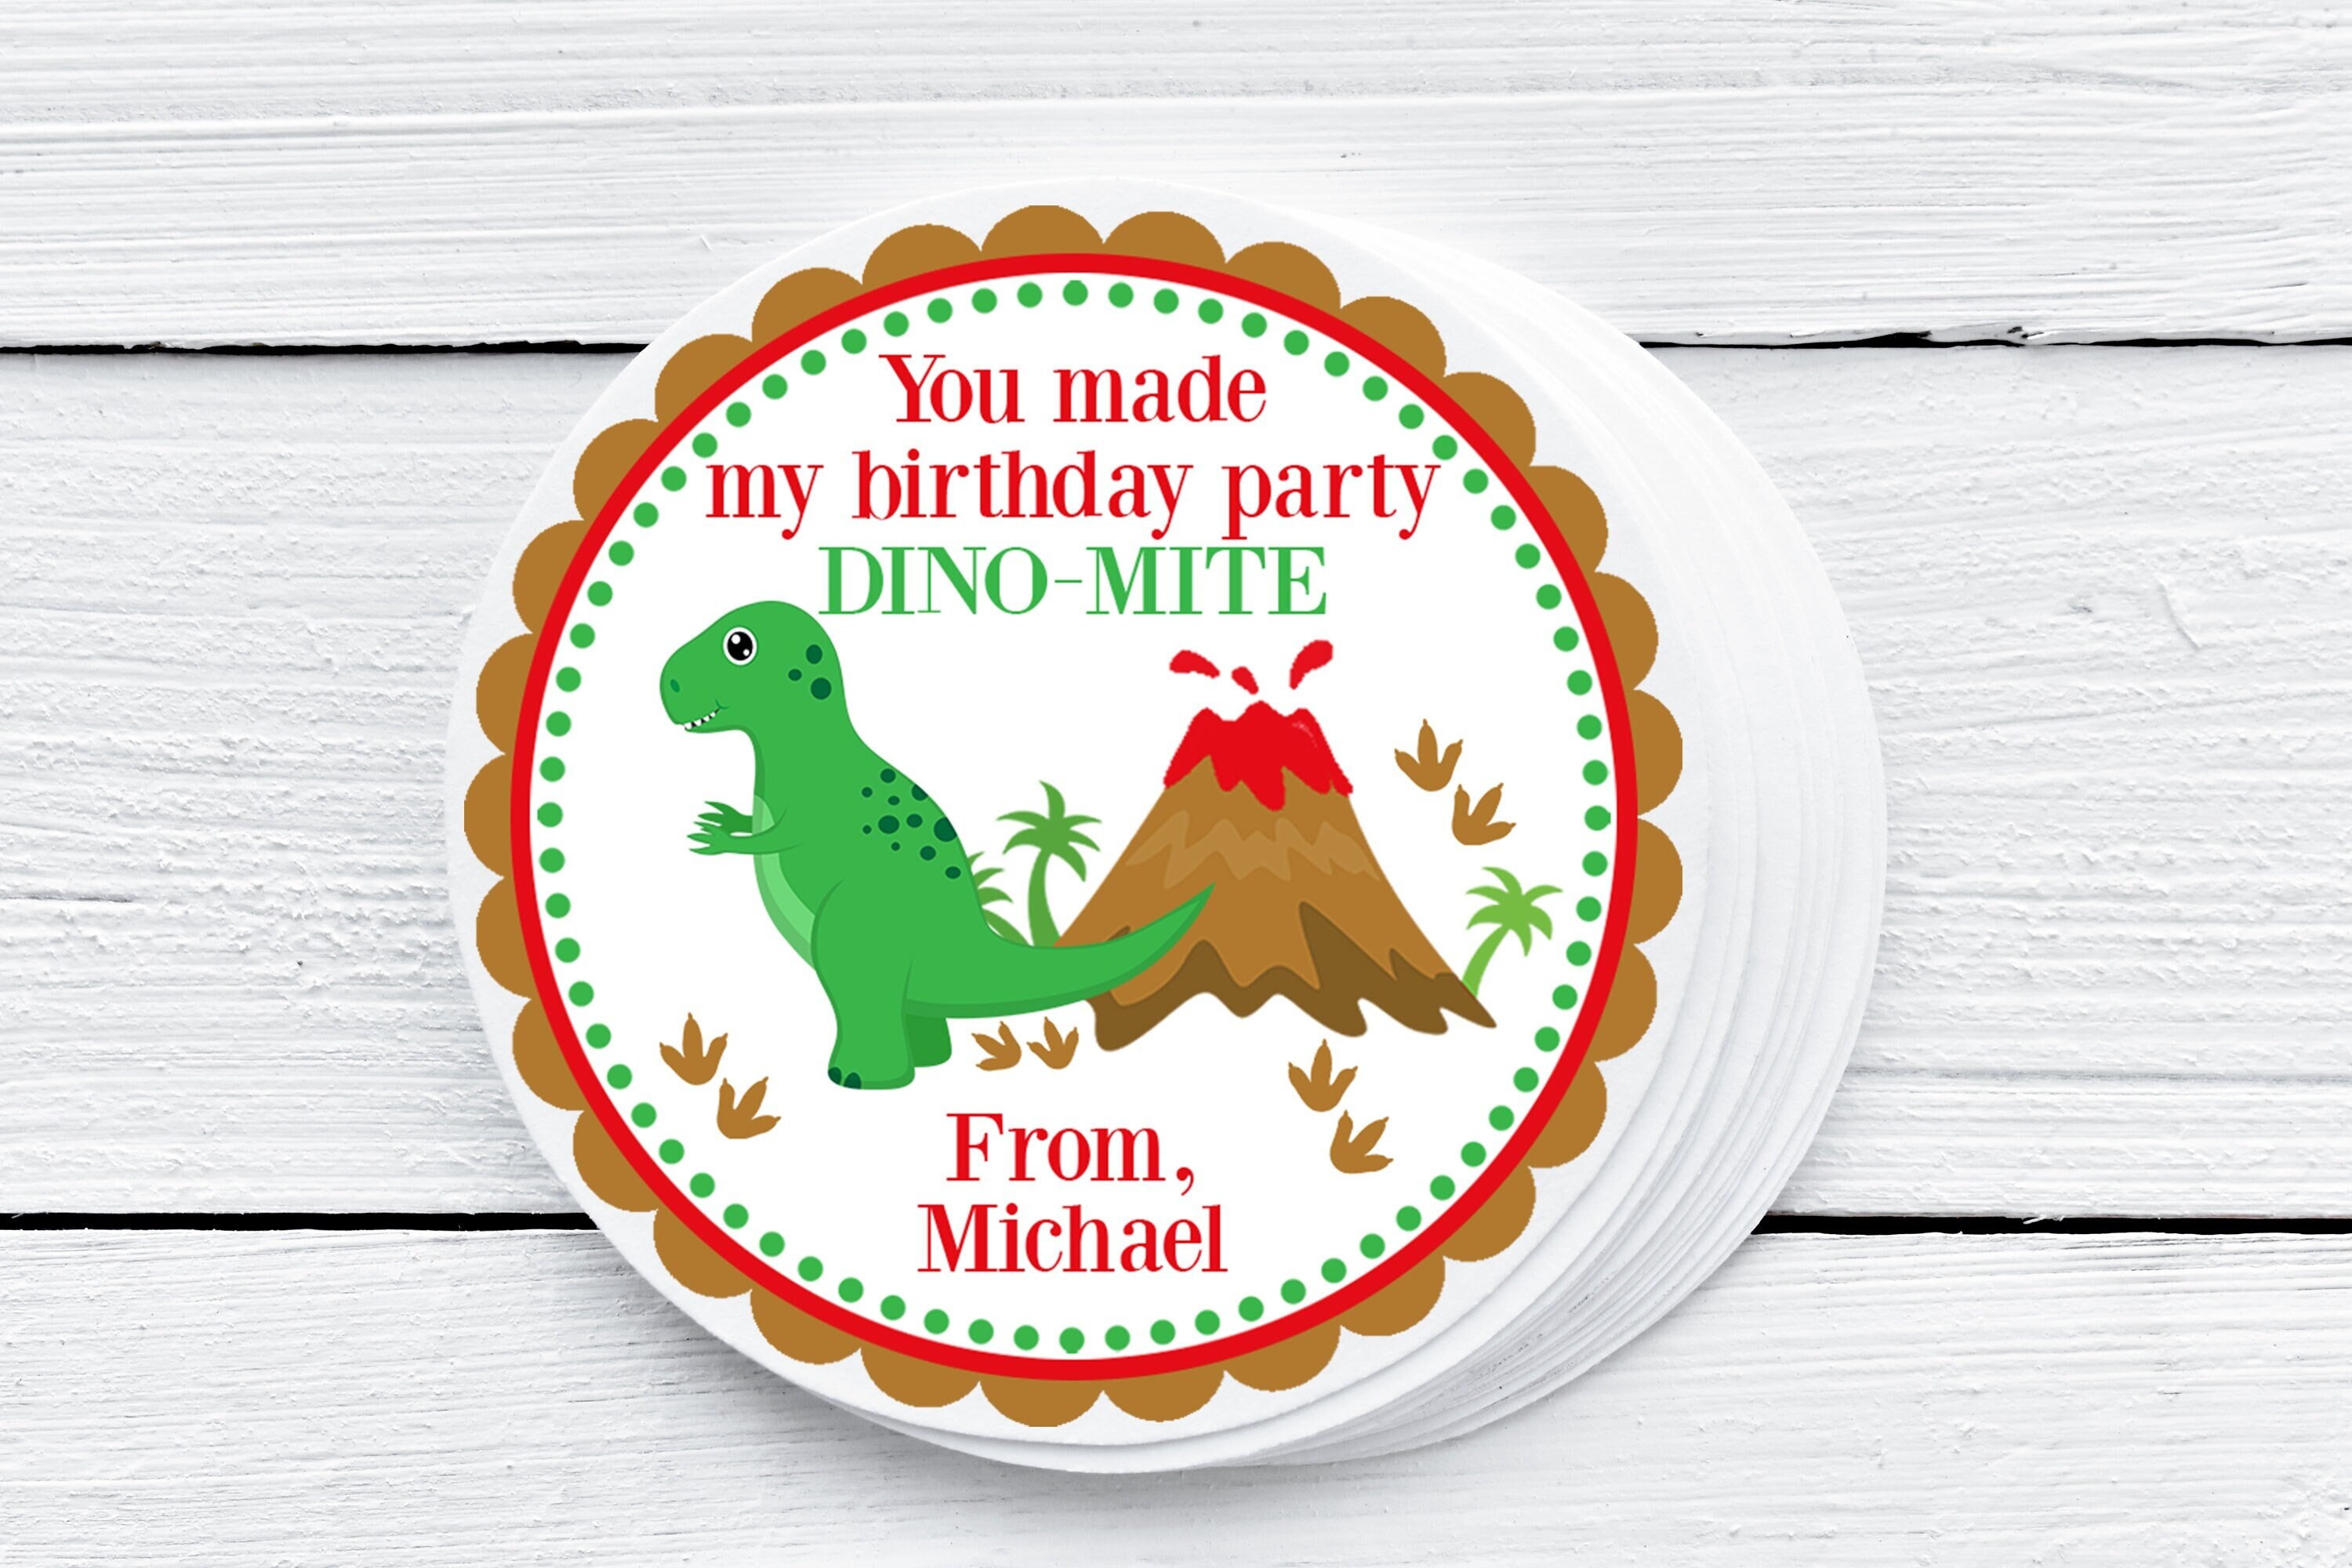 Dino-mite Dinosaur Party Games Printable for Young Kids